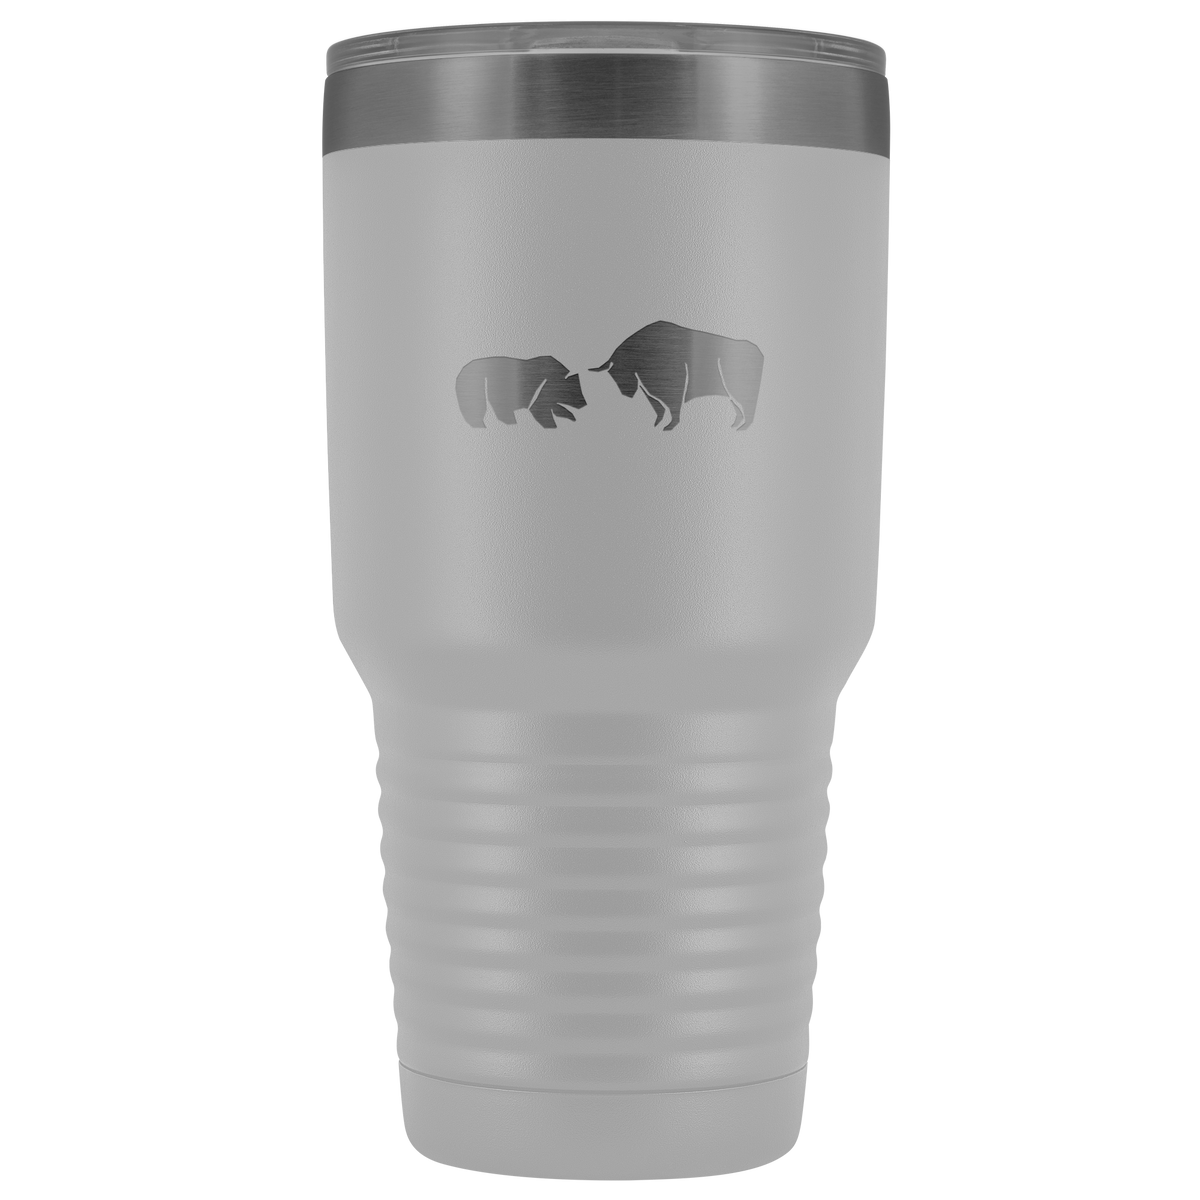 Bull vs bear stainless steel vacuum insulated hot and cold beverage container